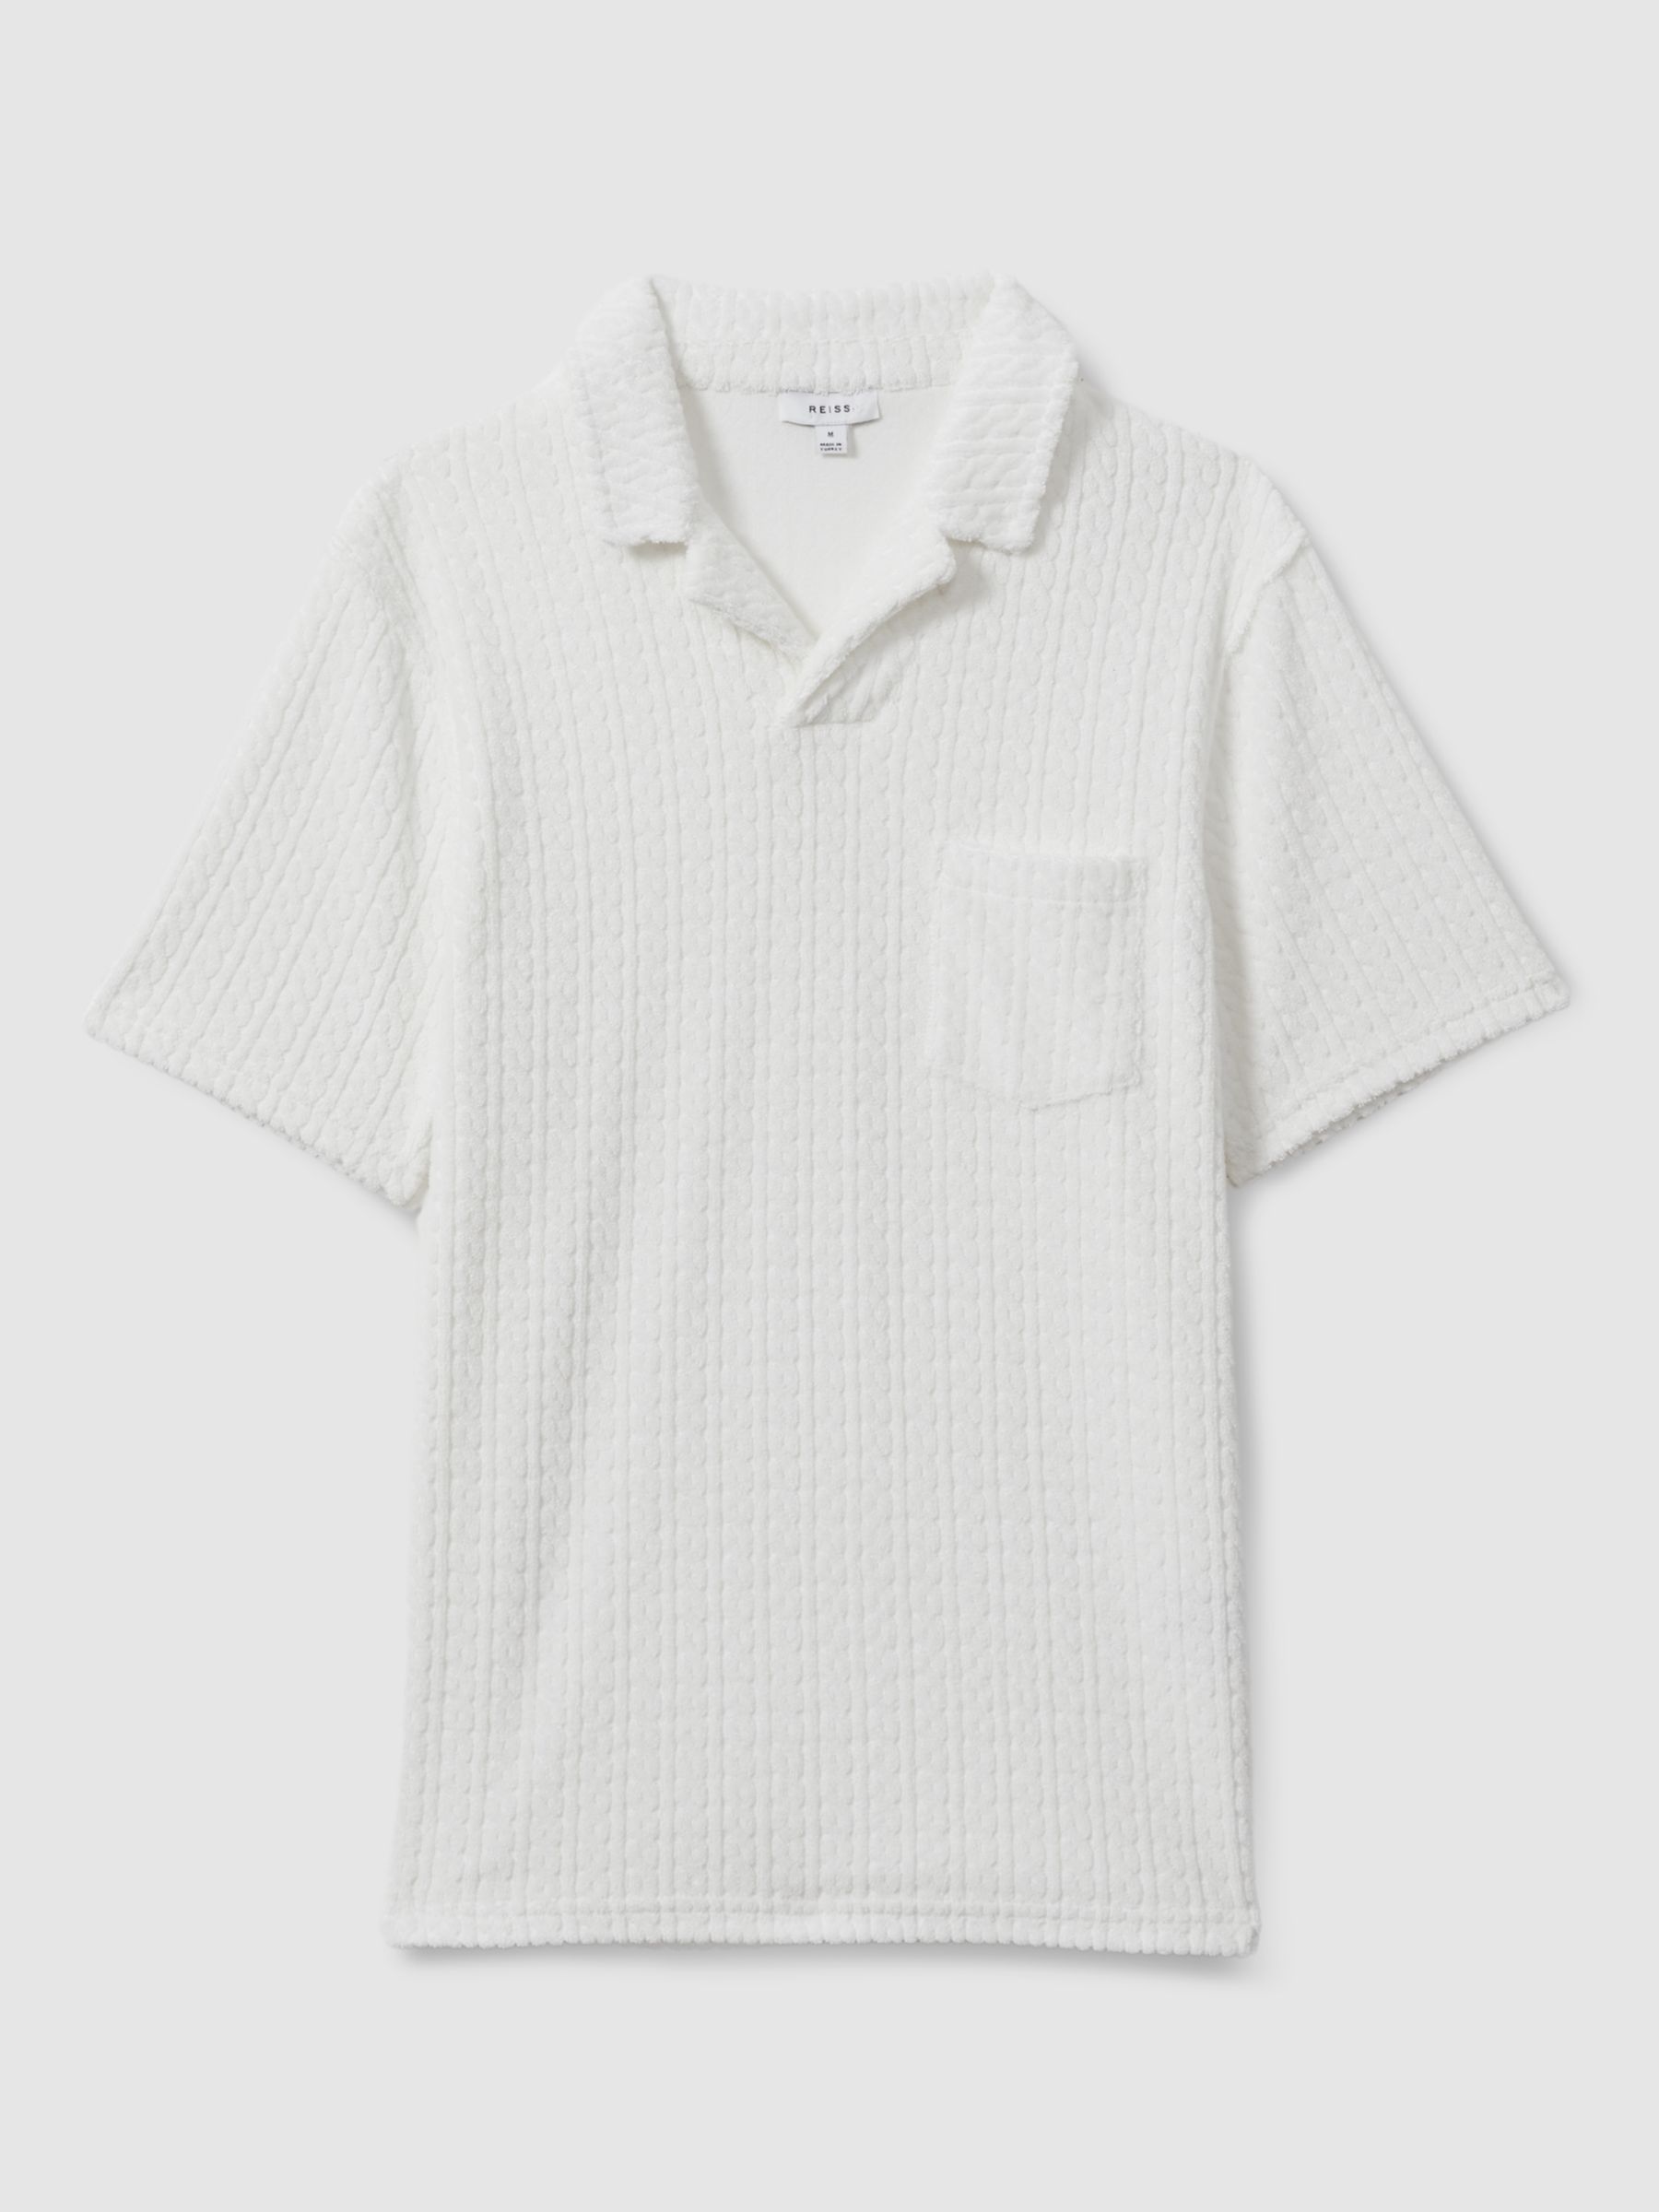 Reiss Cuba Short Sleeve Cable Polo Shirt, White, XS